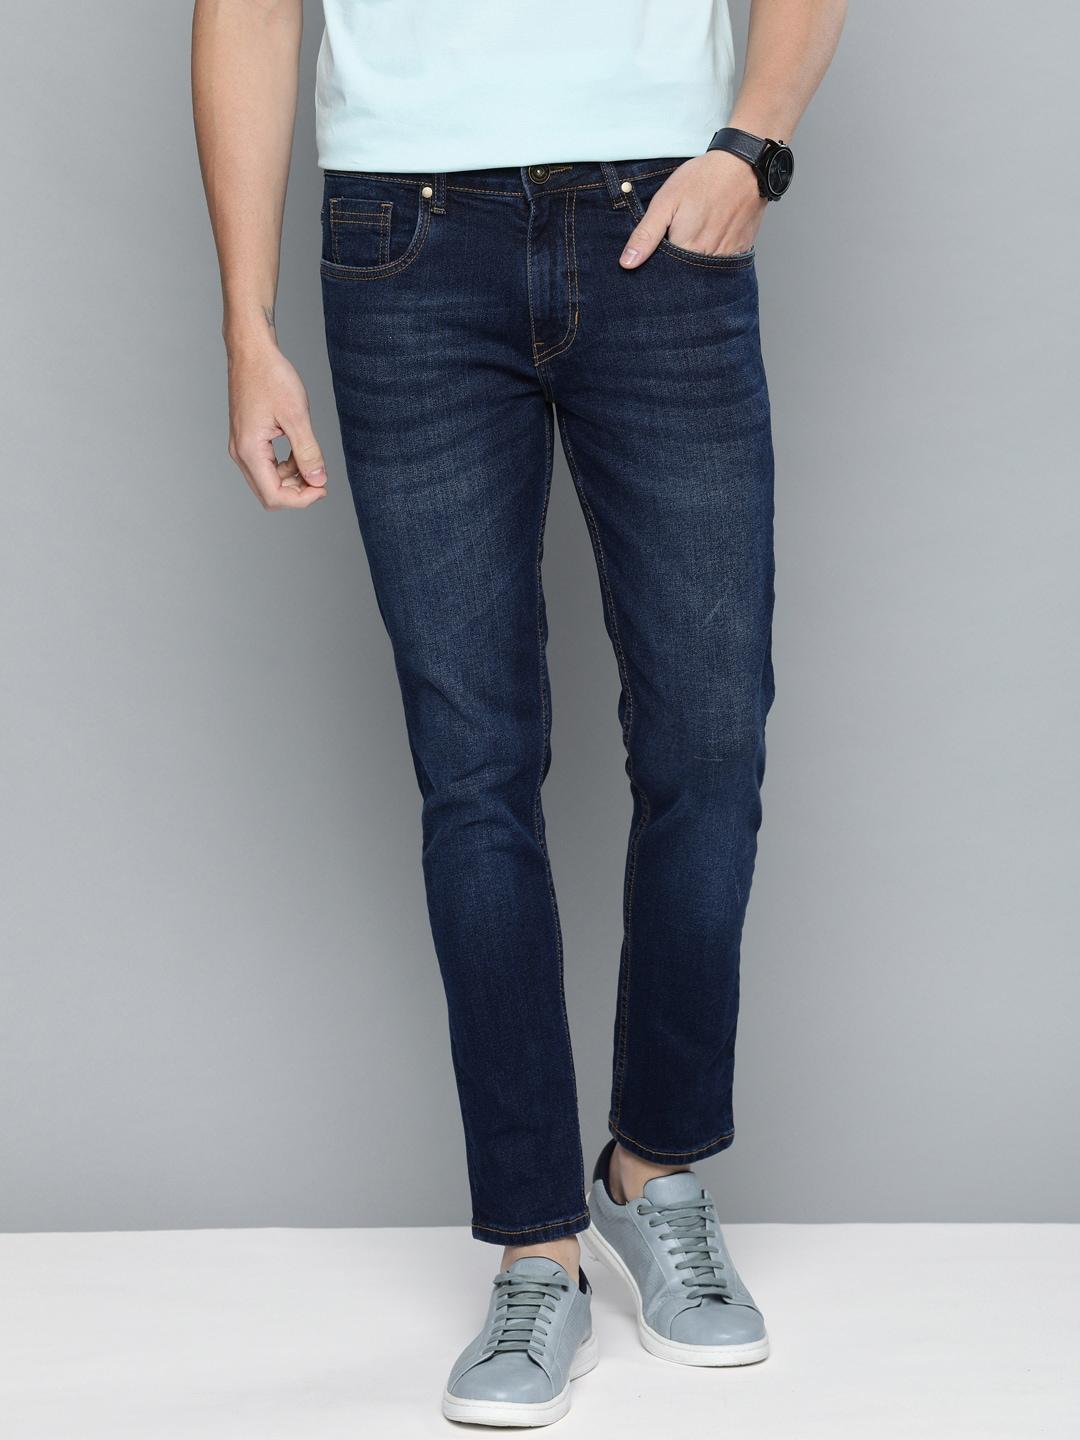 mast-&-harbour-men-navy-blue-skinny-fit-mid-rise-clean-look-stretchable-jeans